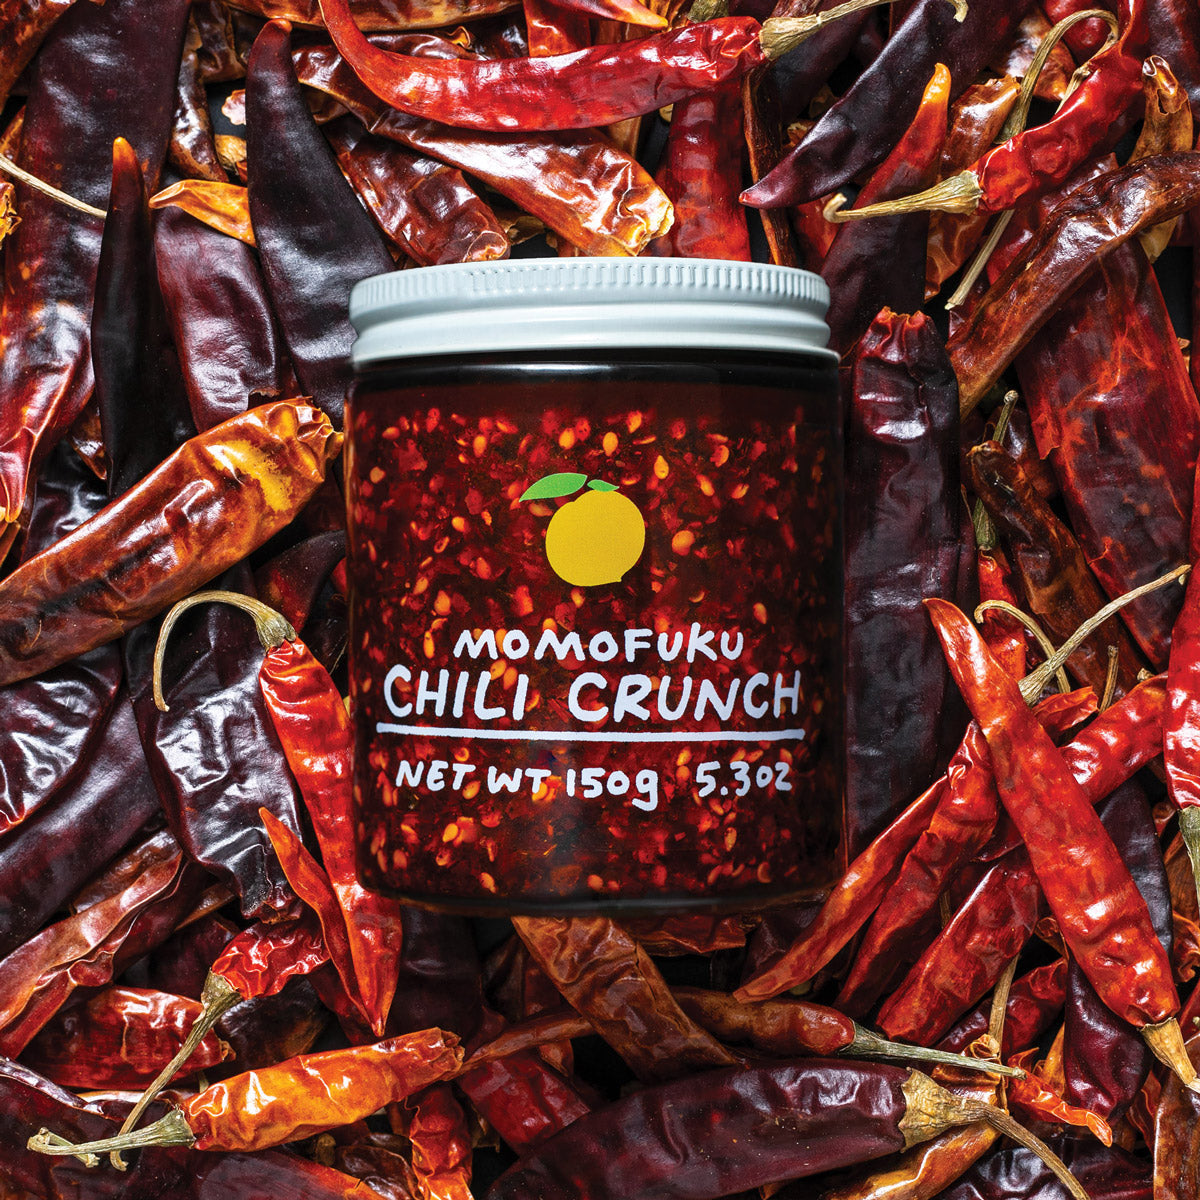 Chili crunch on a bed of chilis